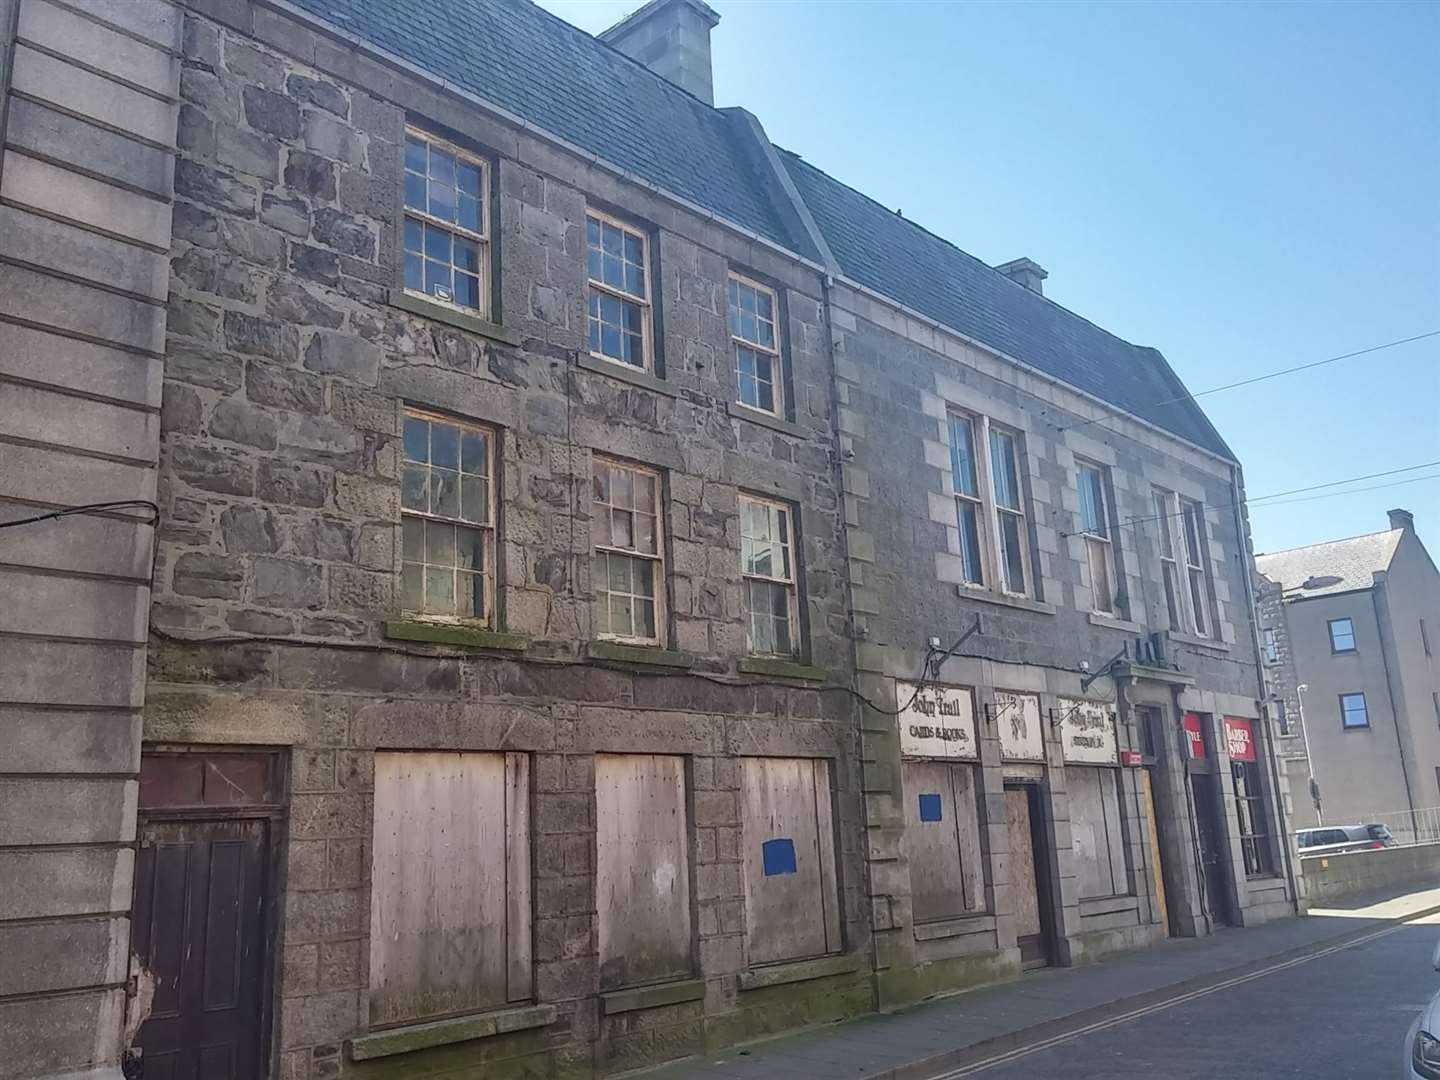 Derelict property in Fraserburgh will be reinstated as part of several town centre regeneration projects.